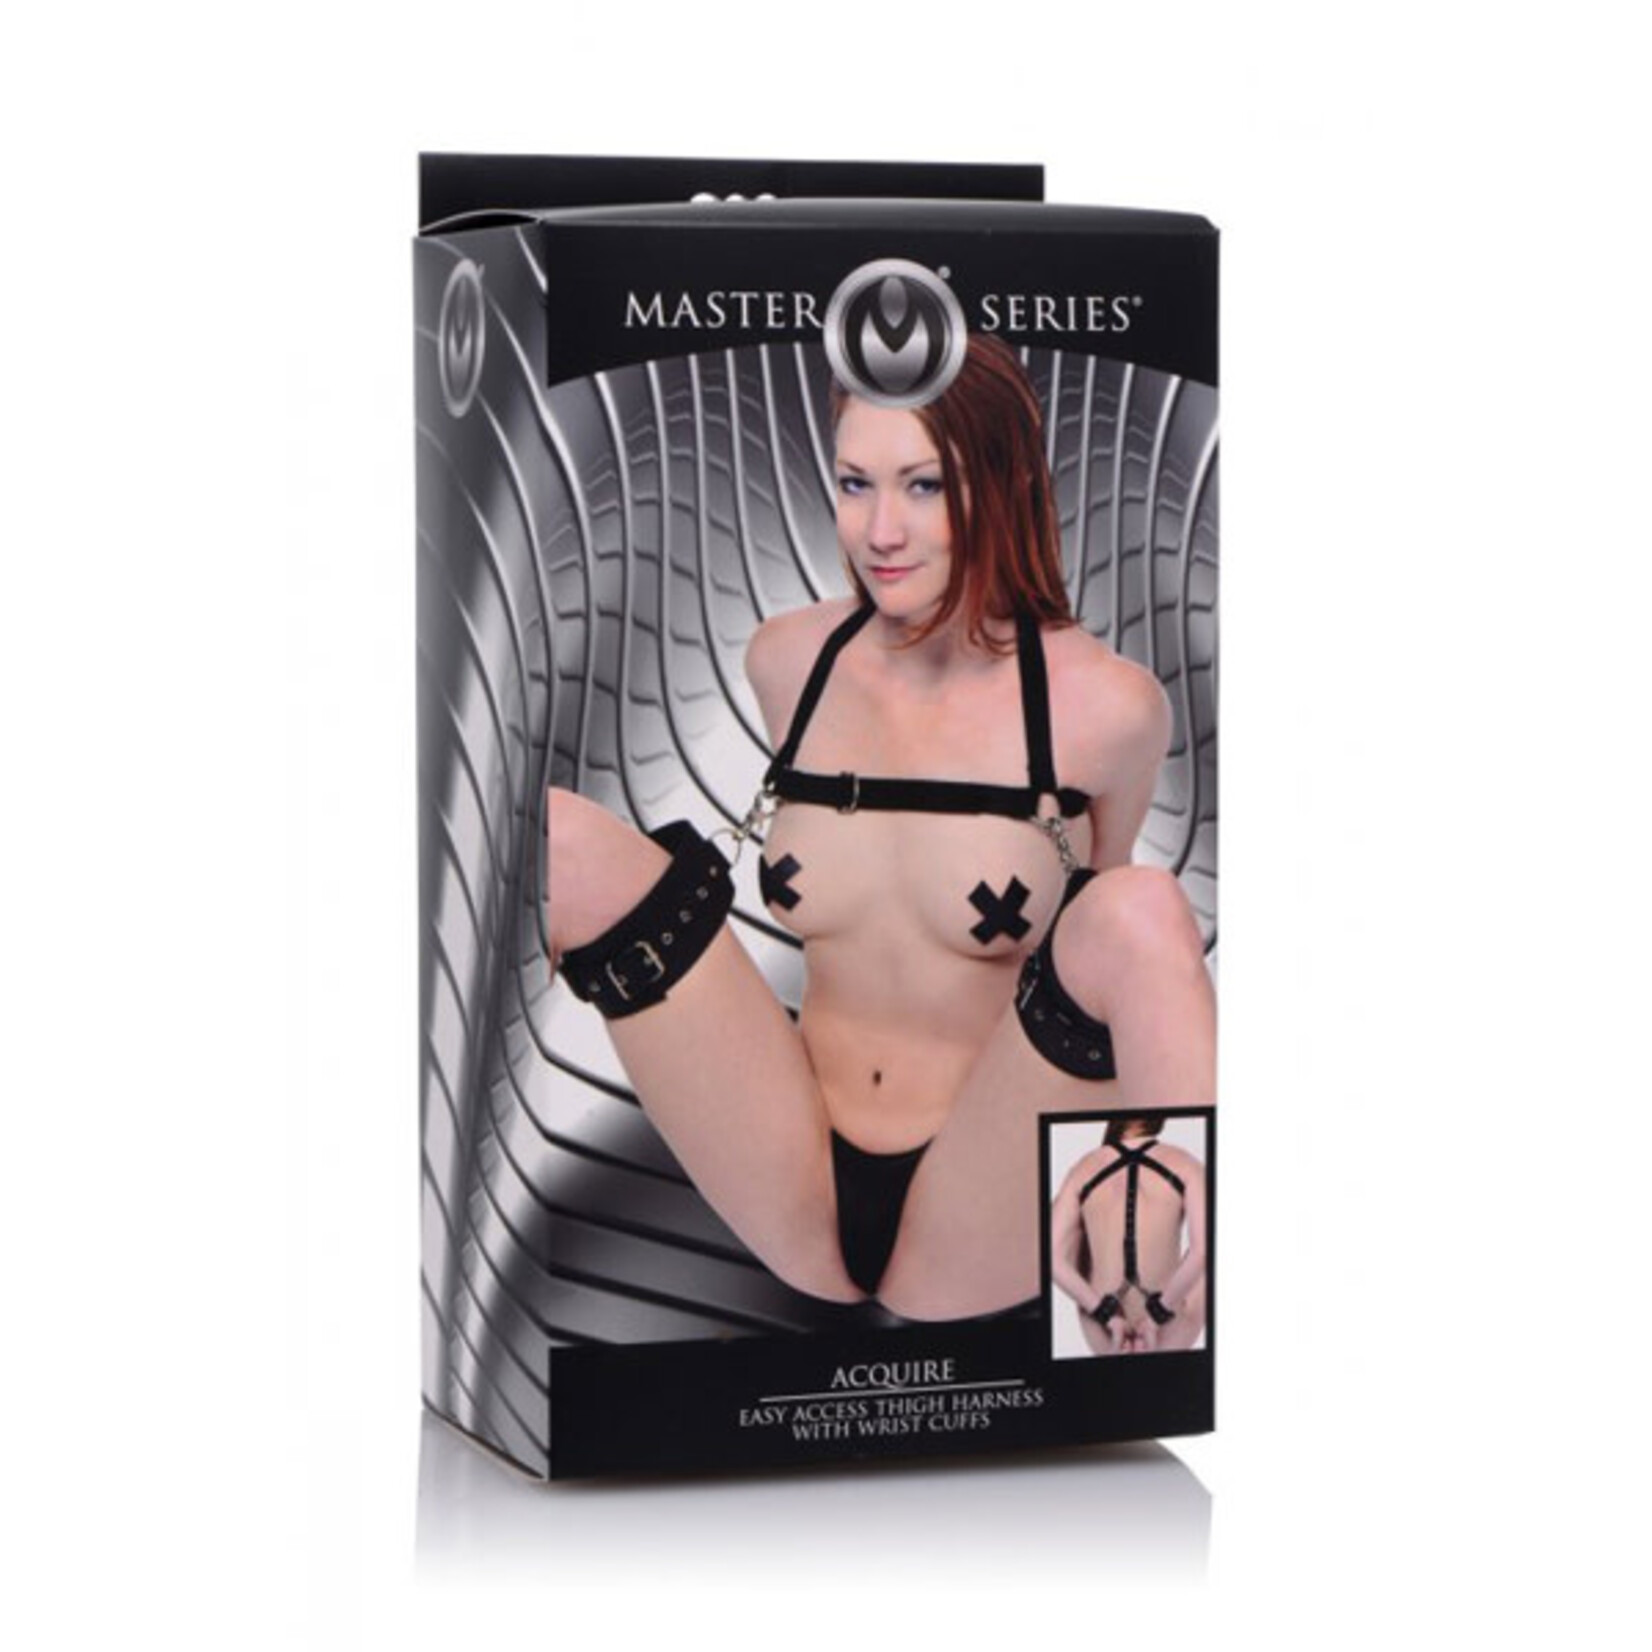 MASTER SERIES MASTER SERIES ACQUIRE THIGH HARNESS WITH CUFFS